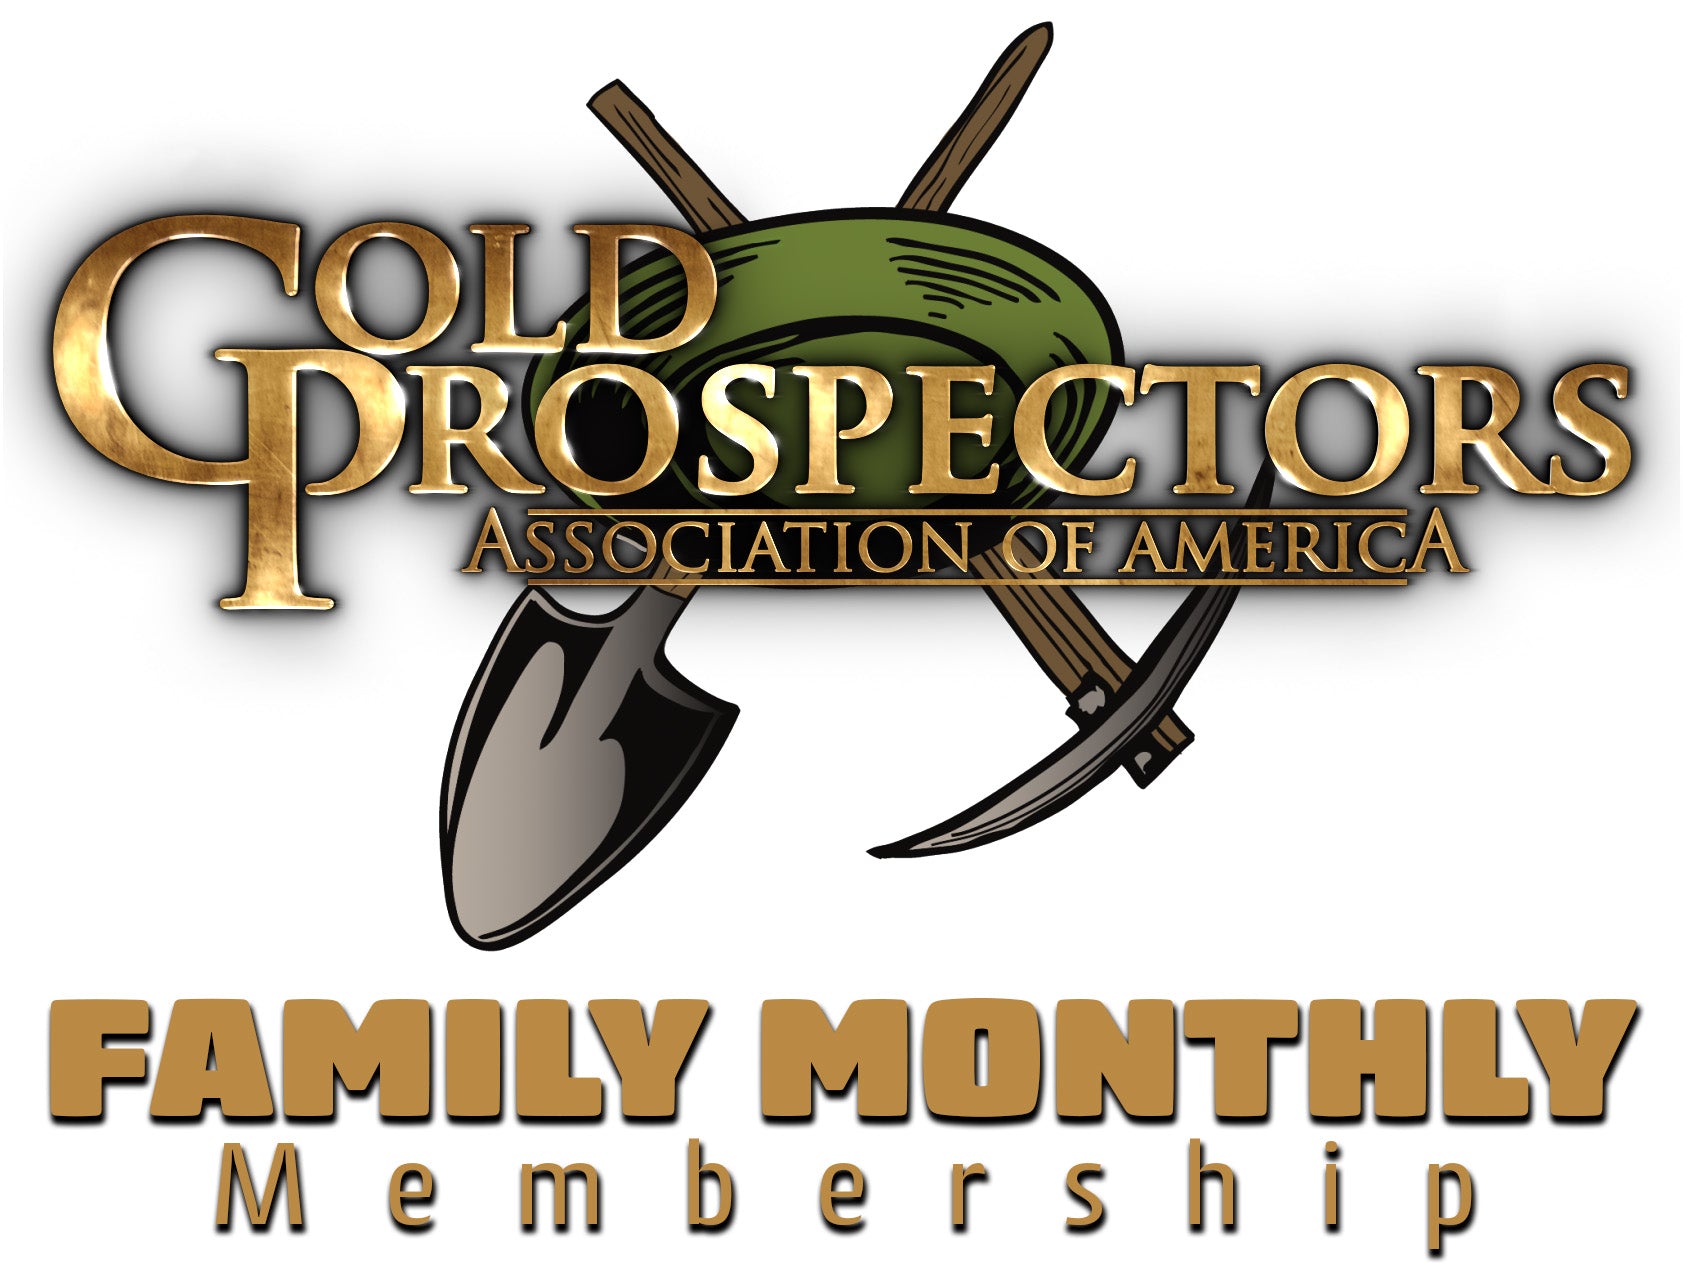 GPAA Family Membership Monthly - Gold Prospectors Association of America